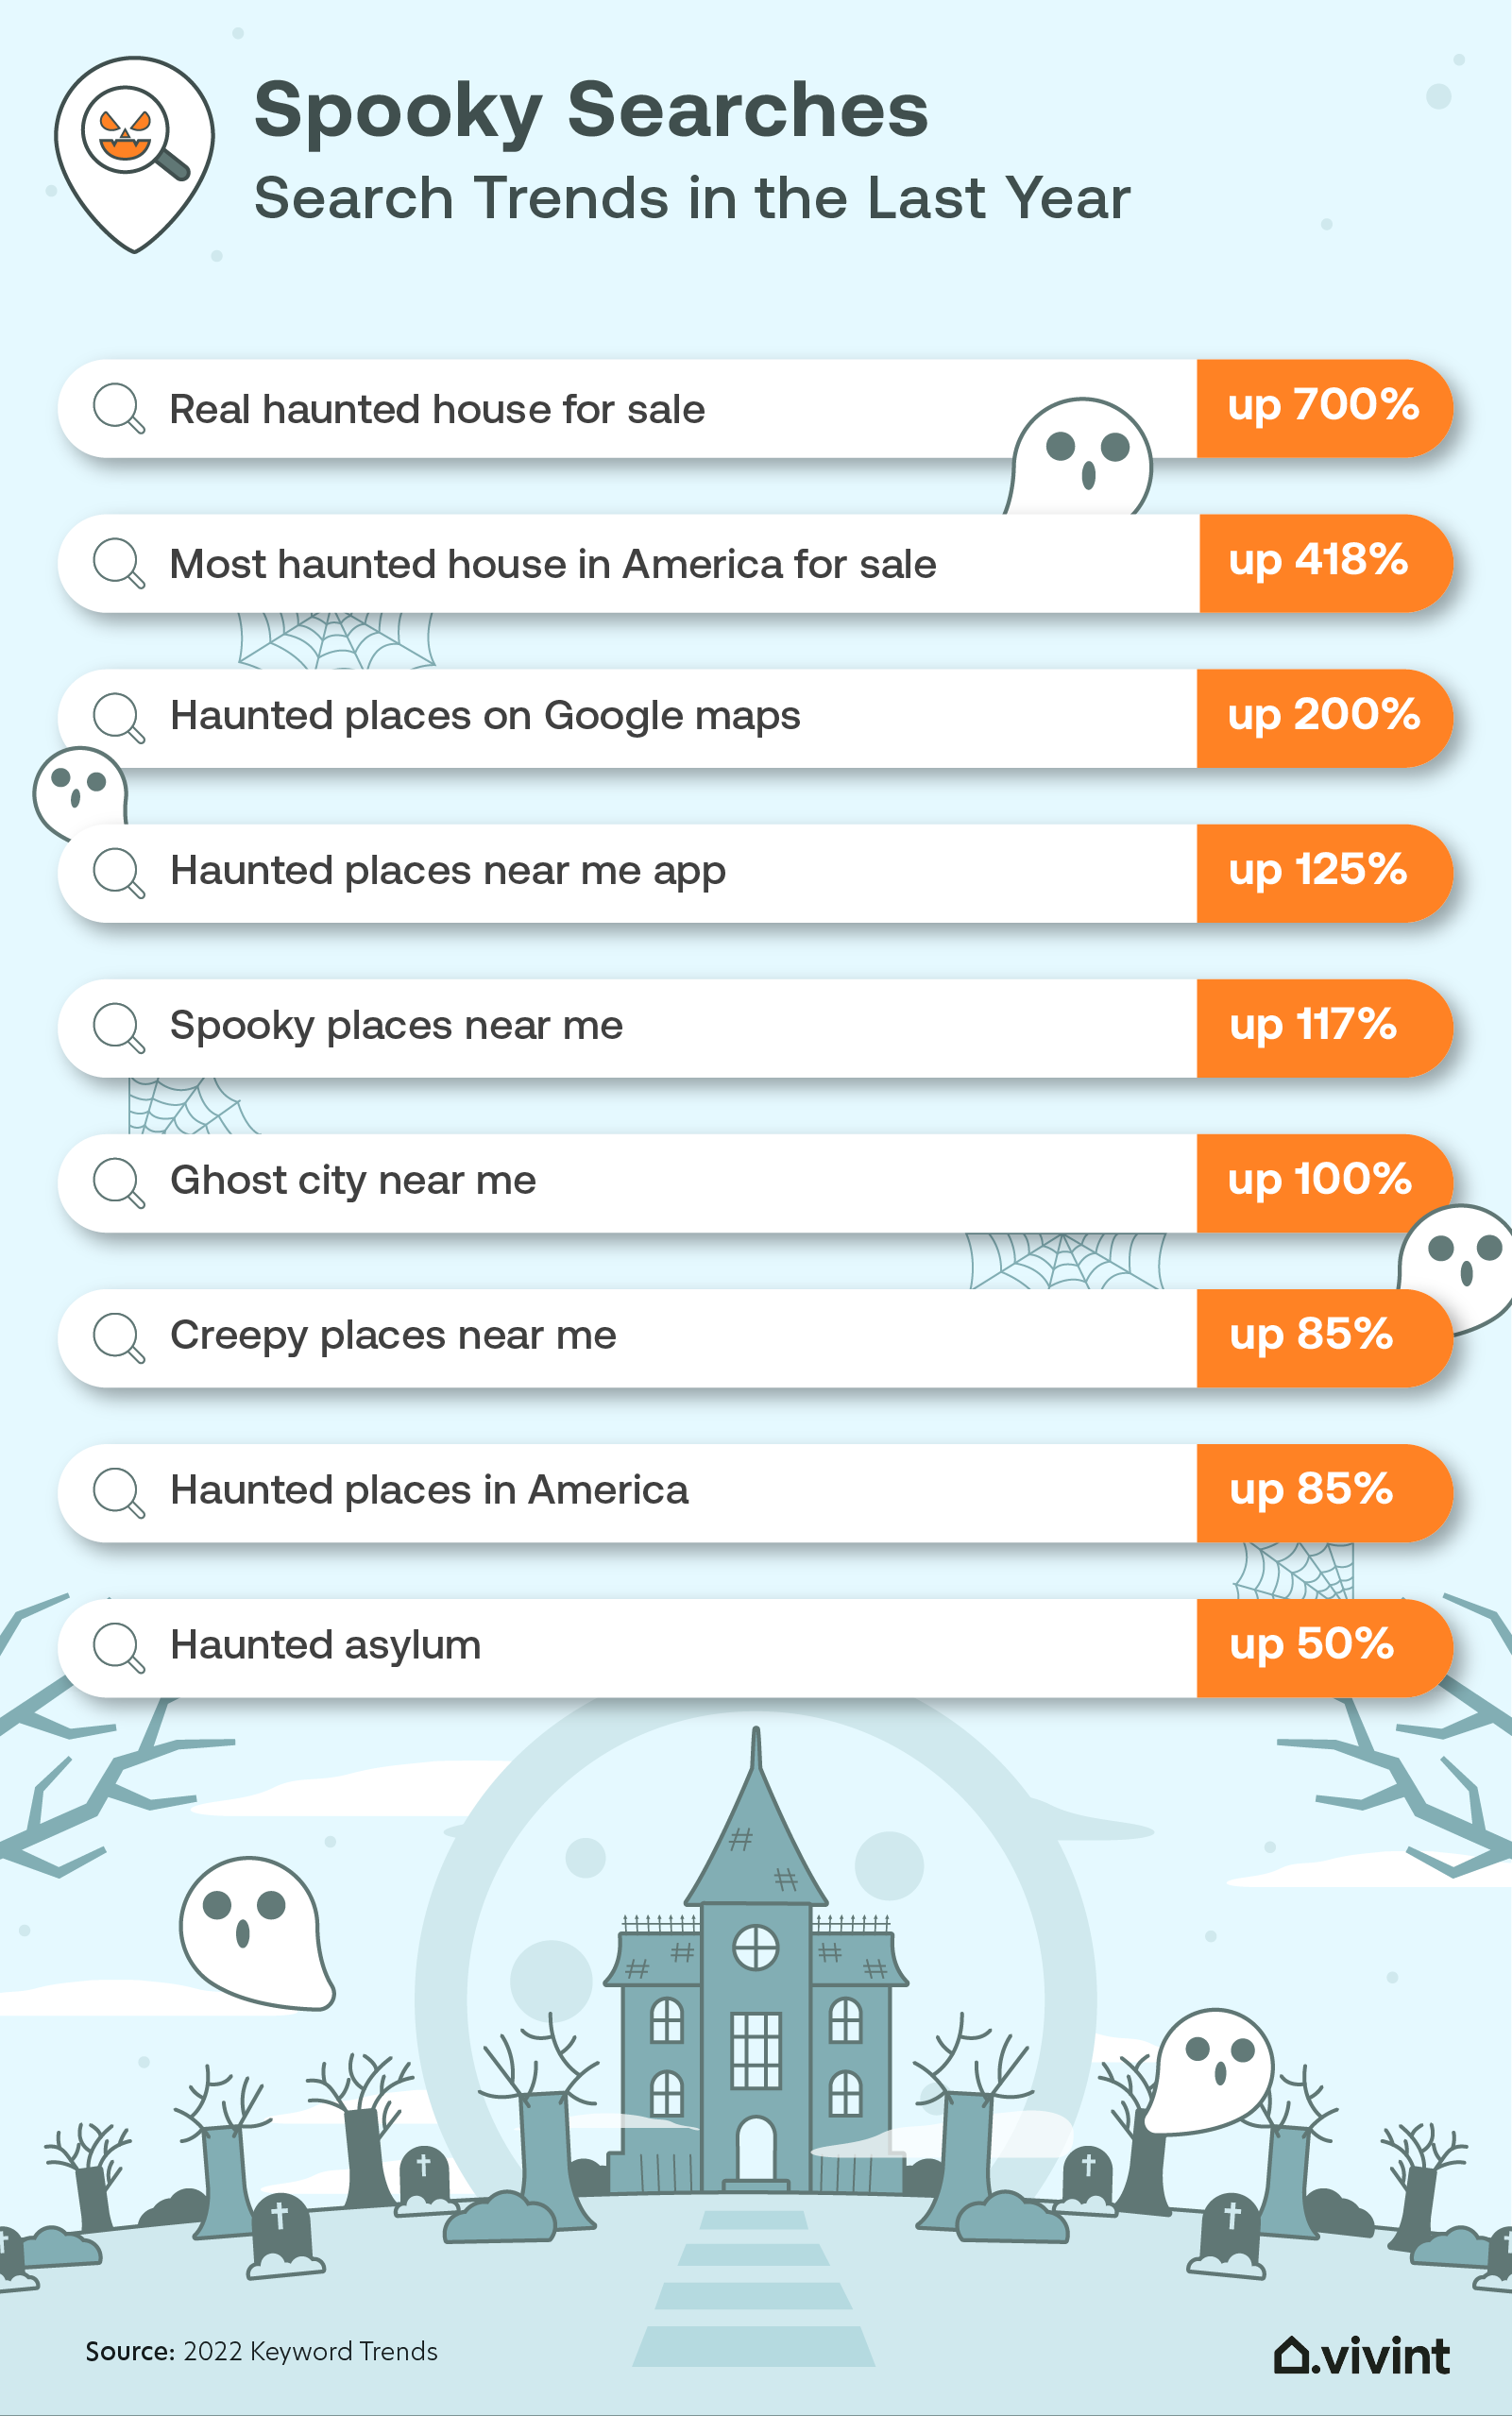 Data explaining internet searches for spooky locations in the U.S.